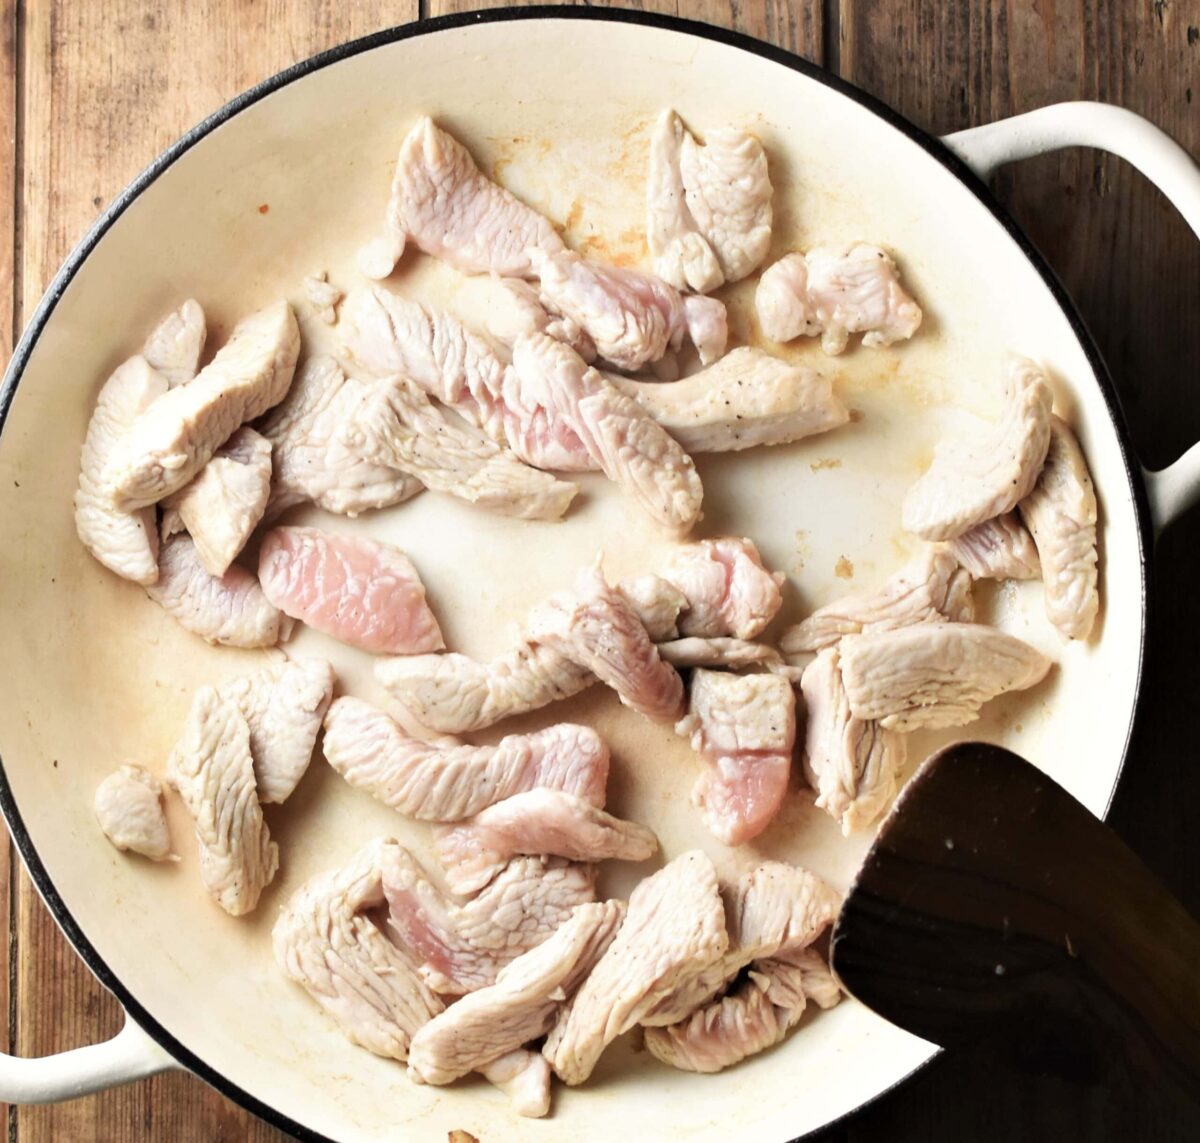 Turkey strips in large white pan with spatula in bottom right corner.